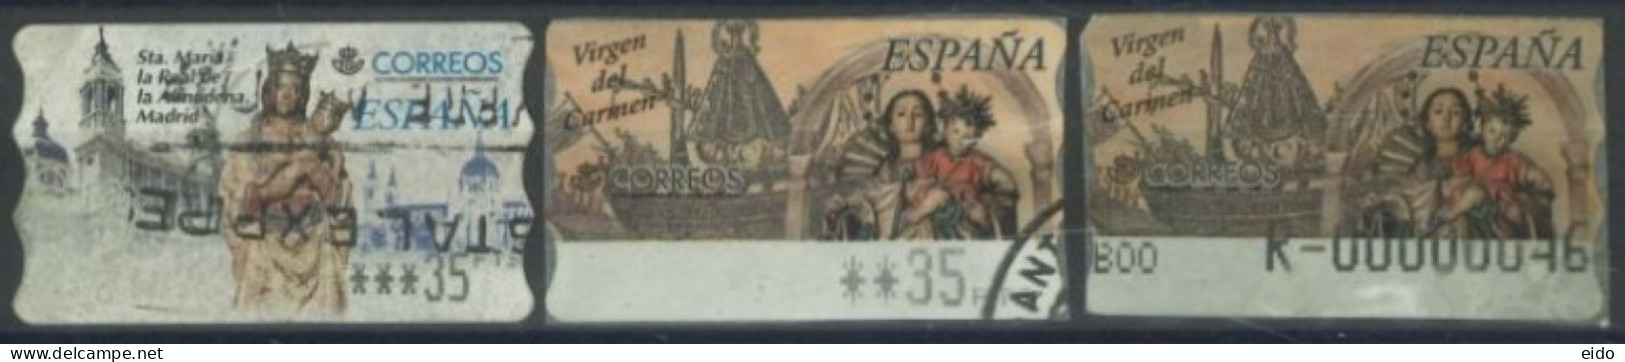 SPAIN - 2000 - ST. MARIA  AND VIRGIN OF CARMEN . STAMPS LABELS SET OF 3 OF DIFFERENT VALUES, USED . - Oblitérés